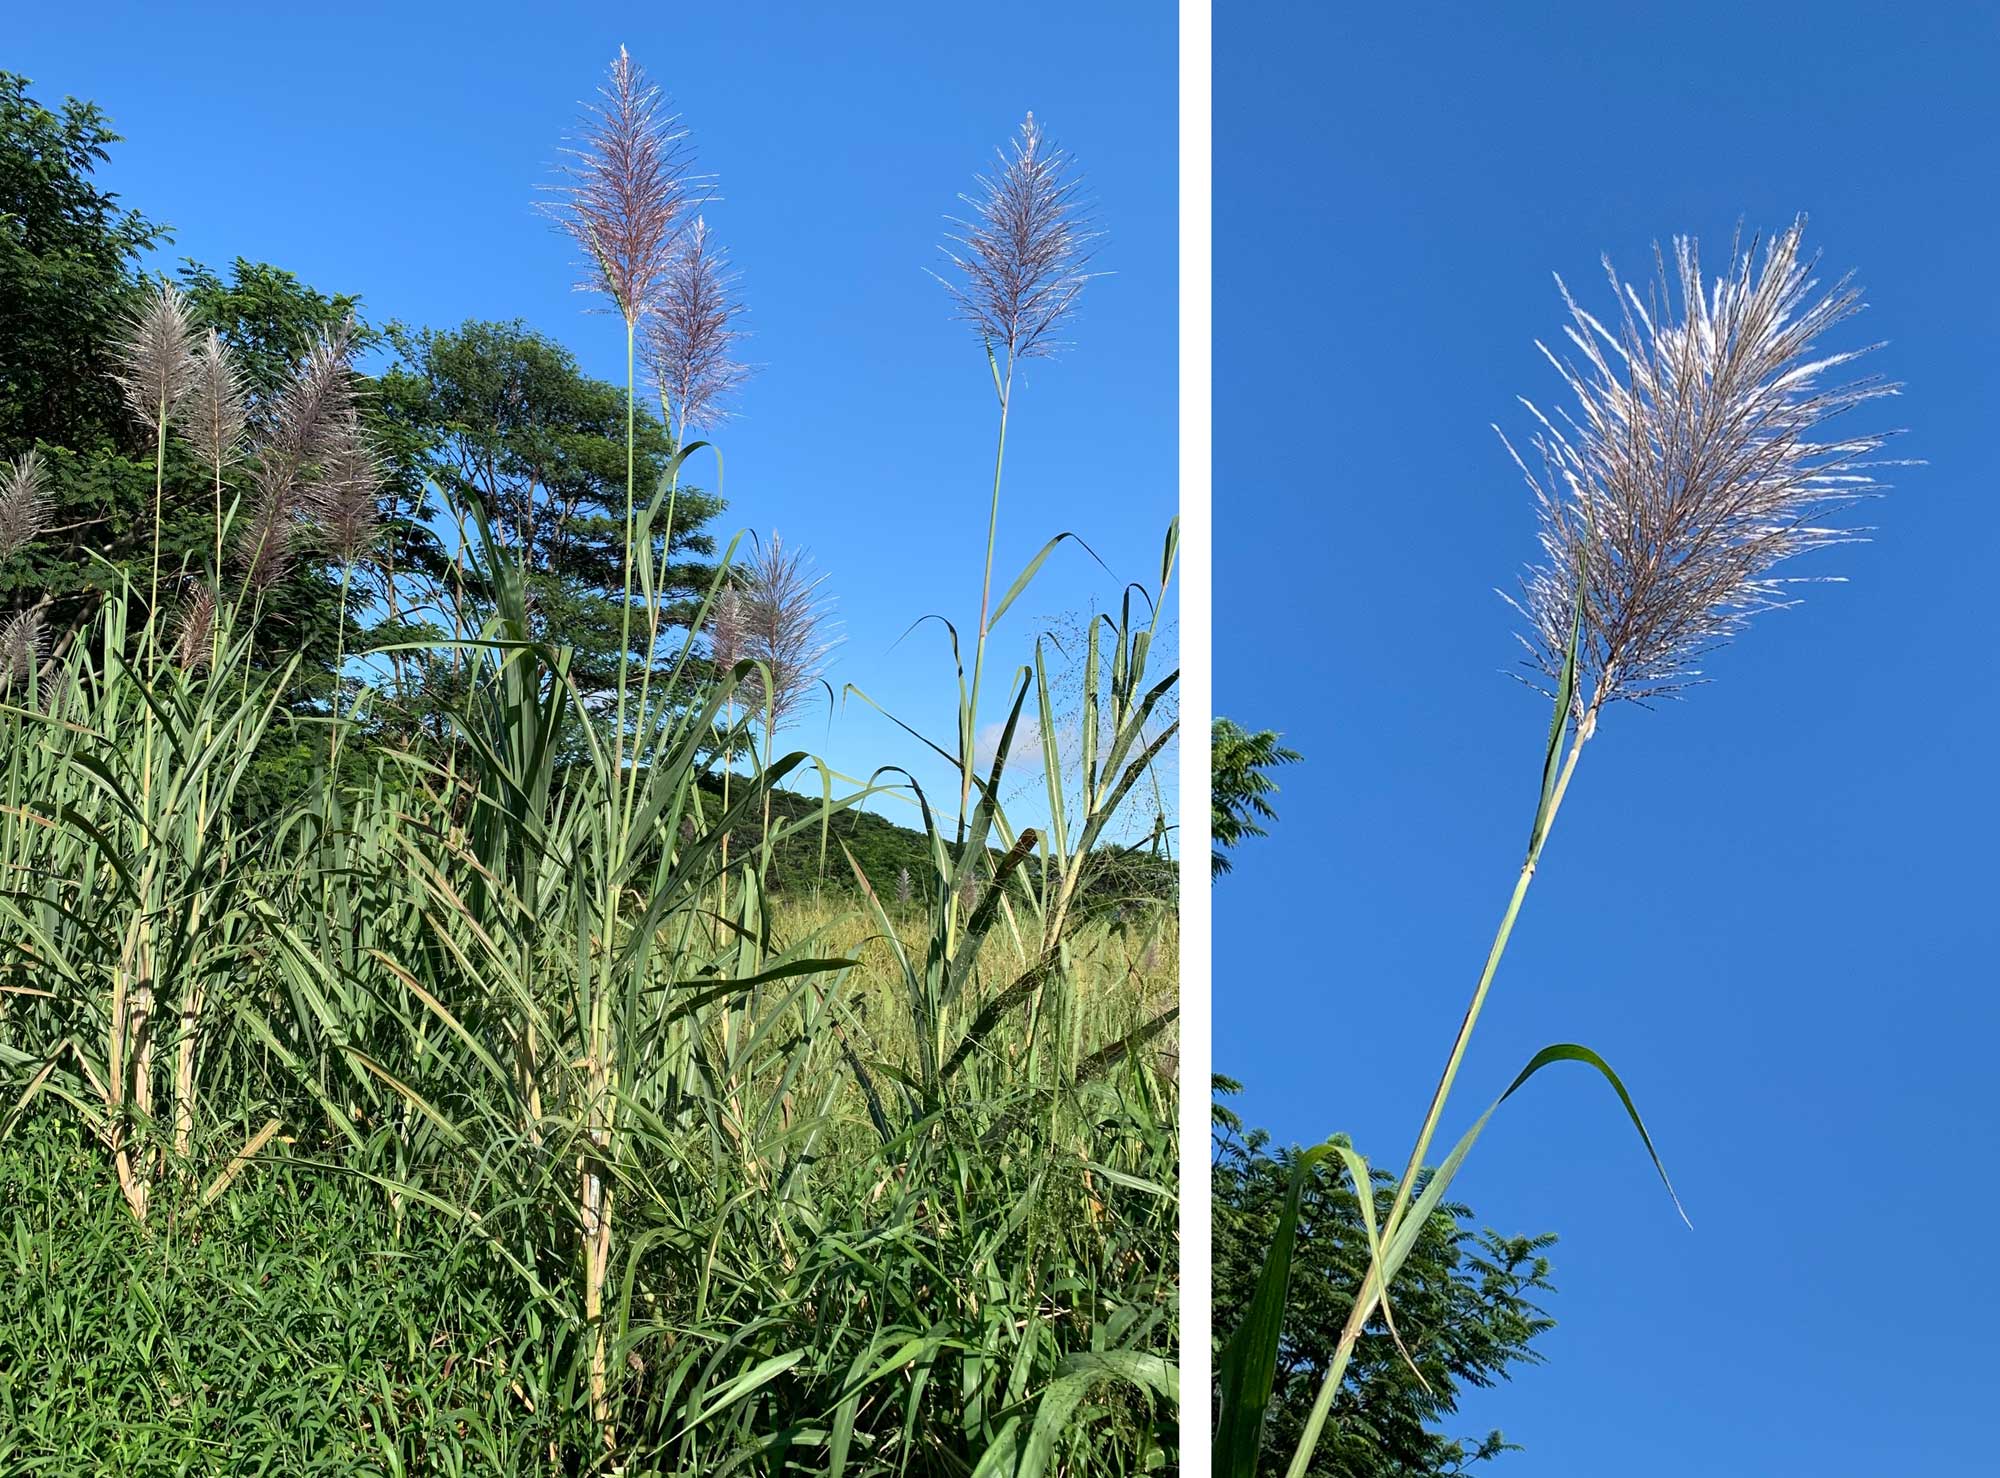 2-panel figure showing photos of Chinese sugar cane. Panel 1: Sugar cane plants growing at the edge of a field. The photo shows a row of tall grasses with feathery silver inflorescences. Panel 2: Close-up of an inflorescence of that appears feathery and silver in color.